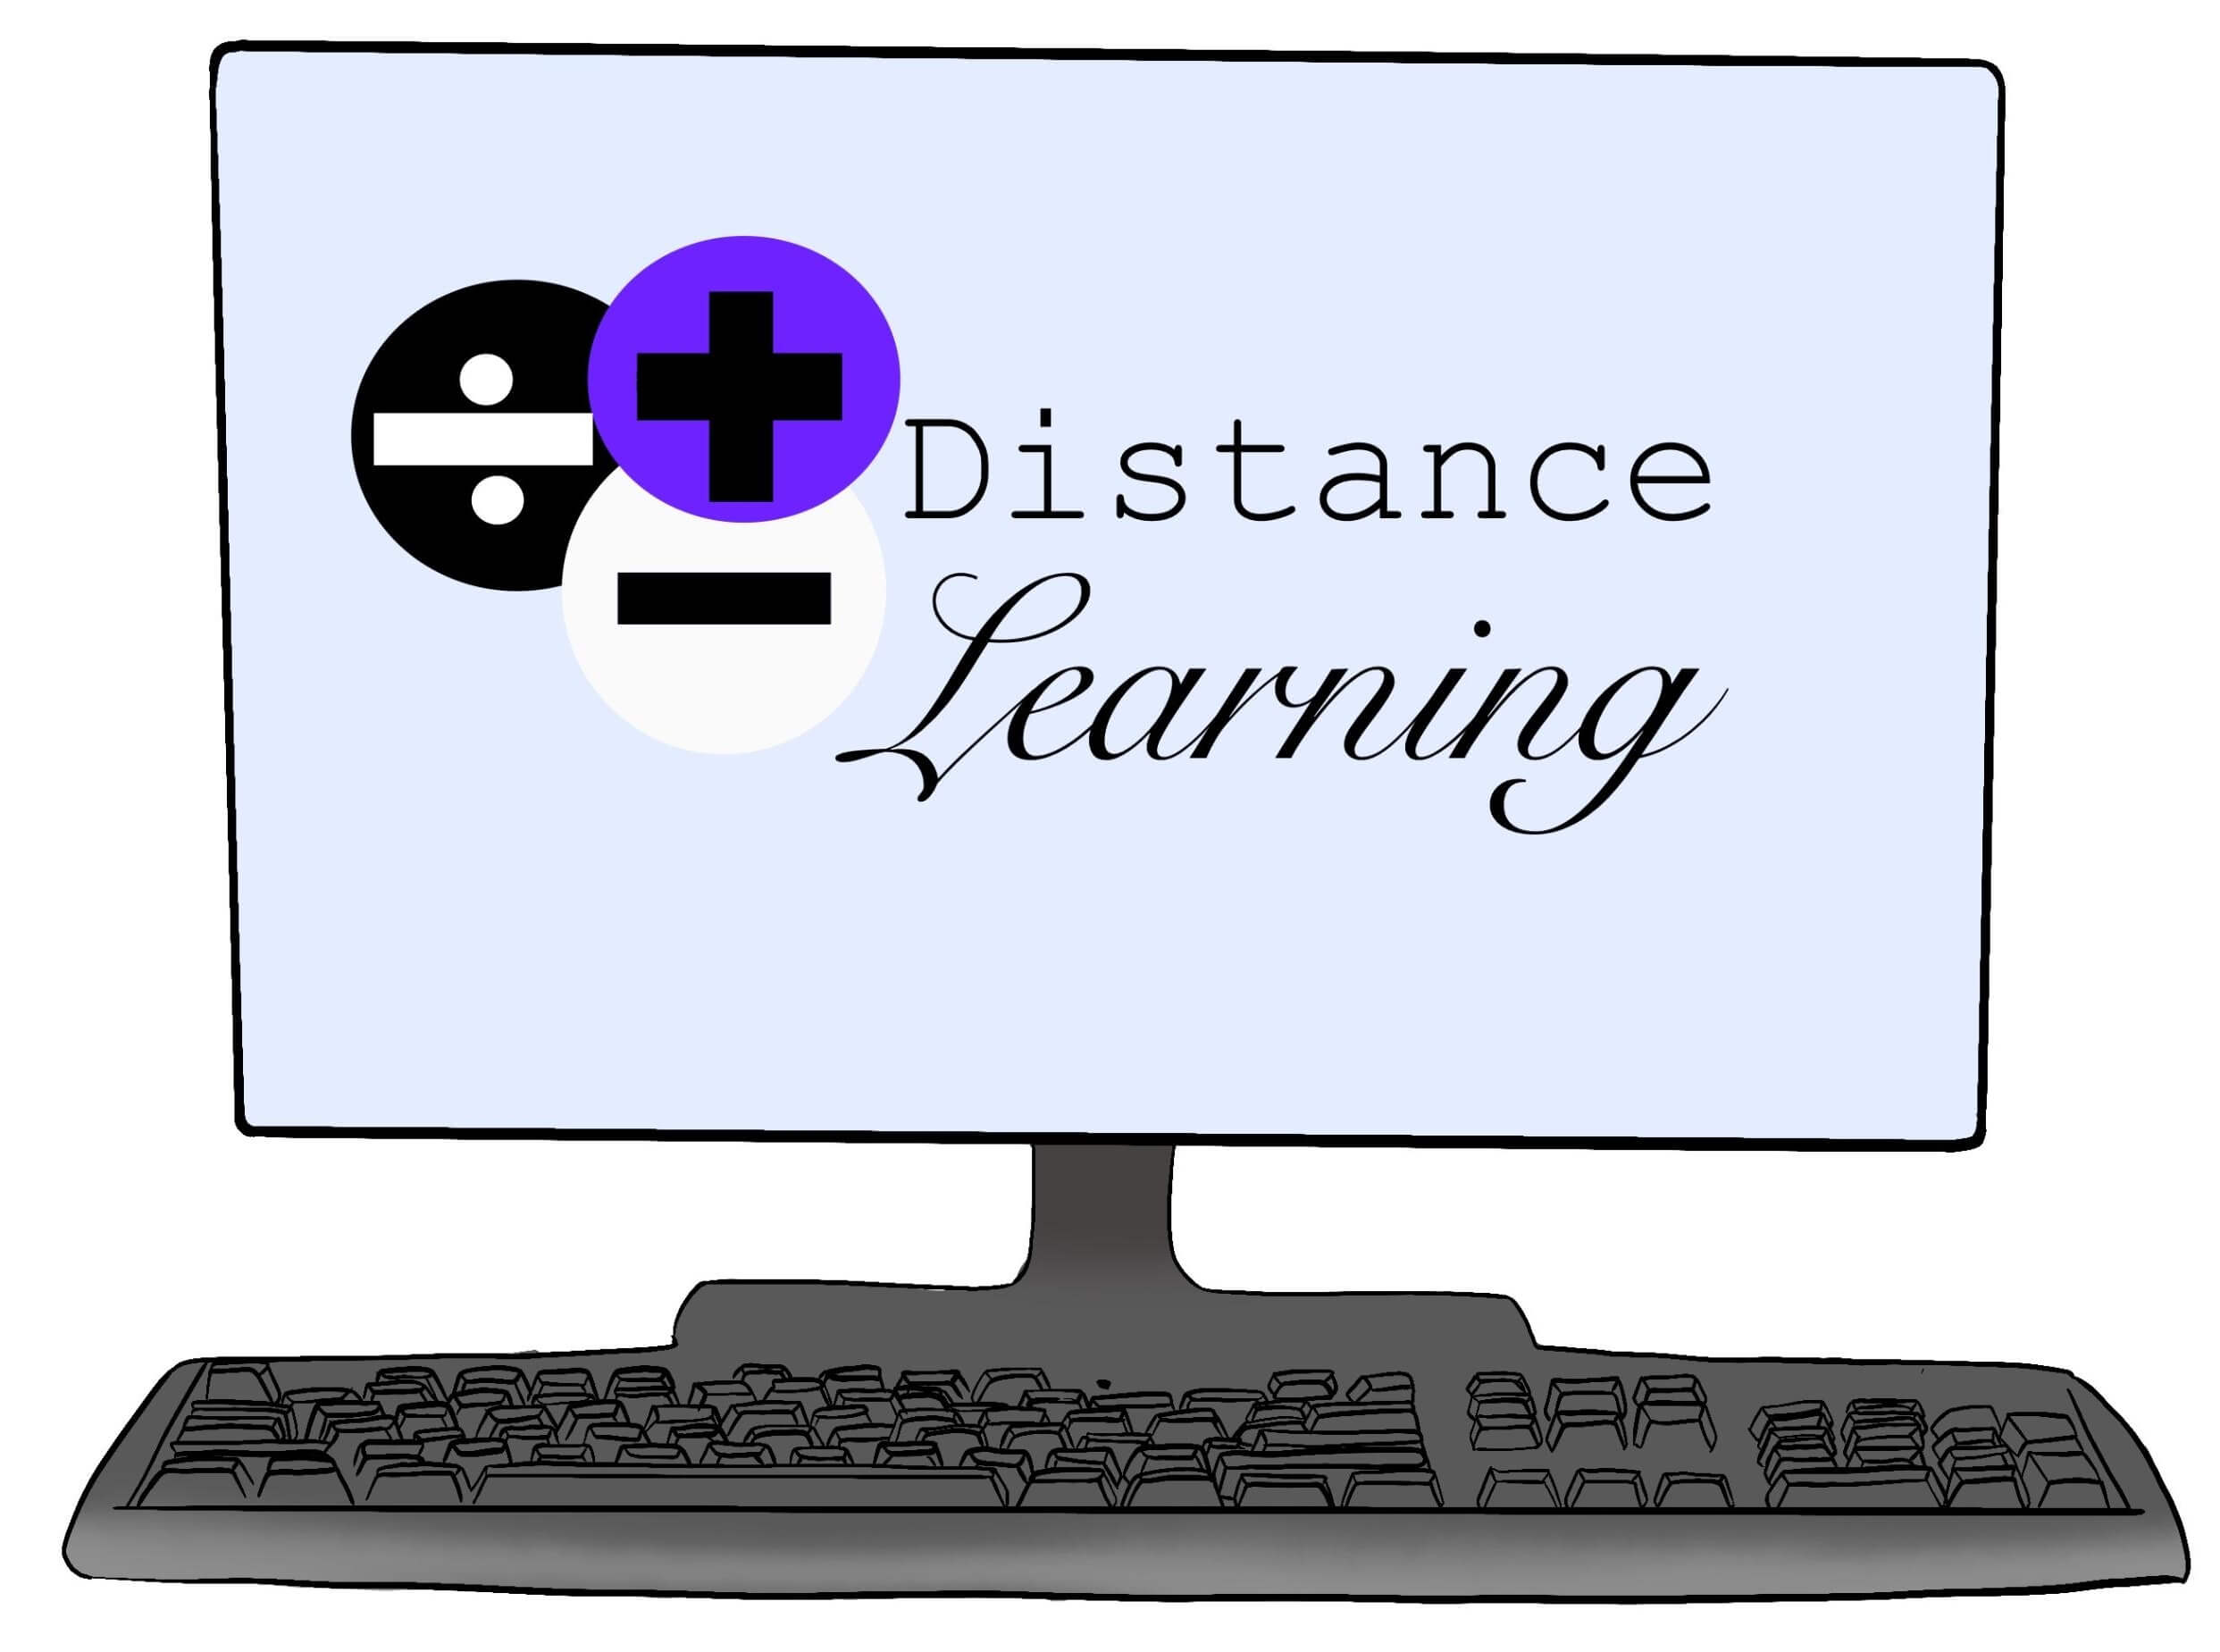 Free Distance Learning Resources for Teachers